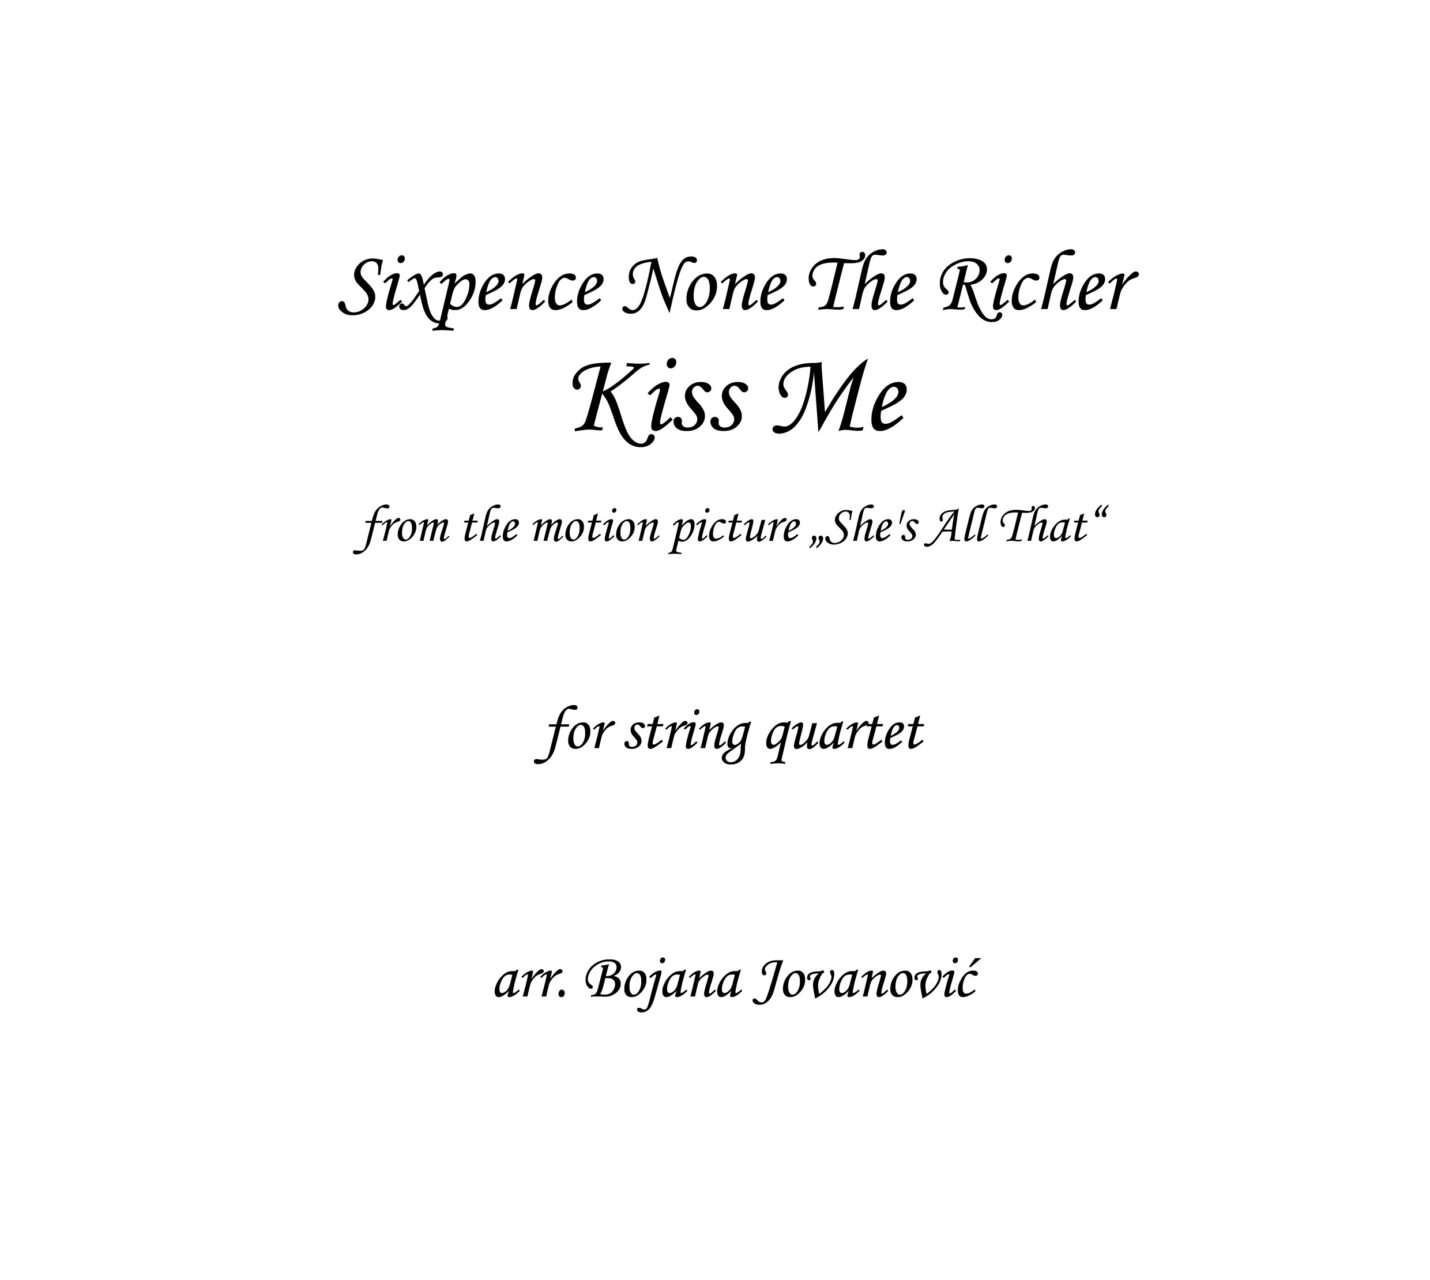 Kiss me Sixpence None The Richer Sheet music - for String quartet